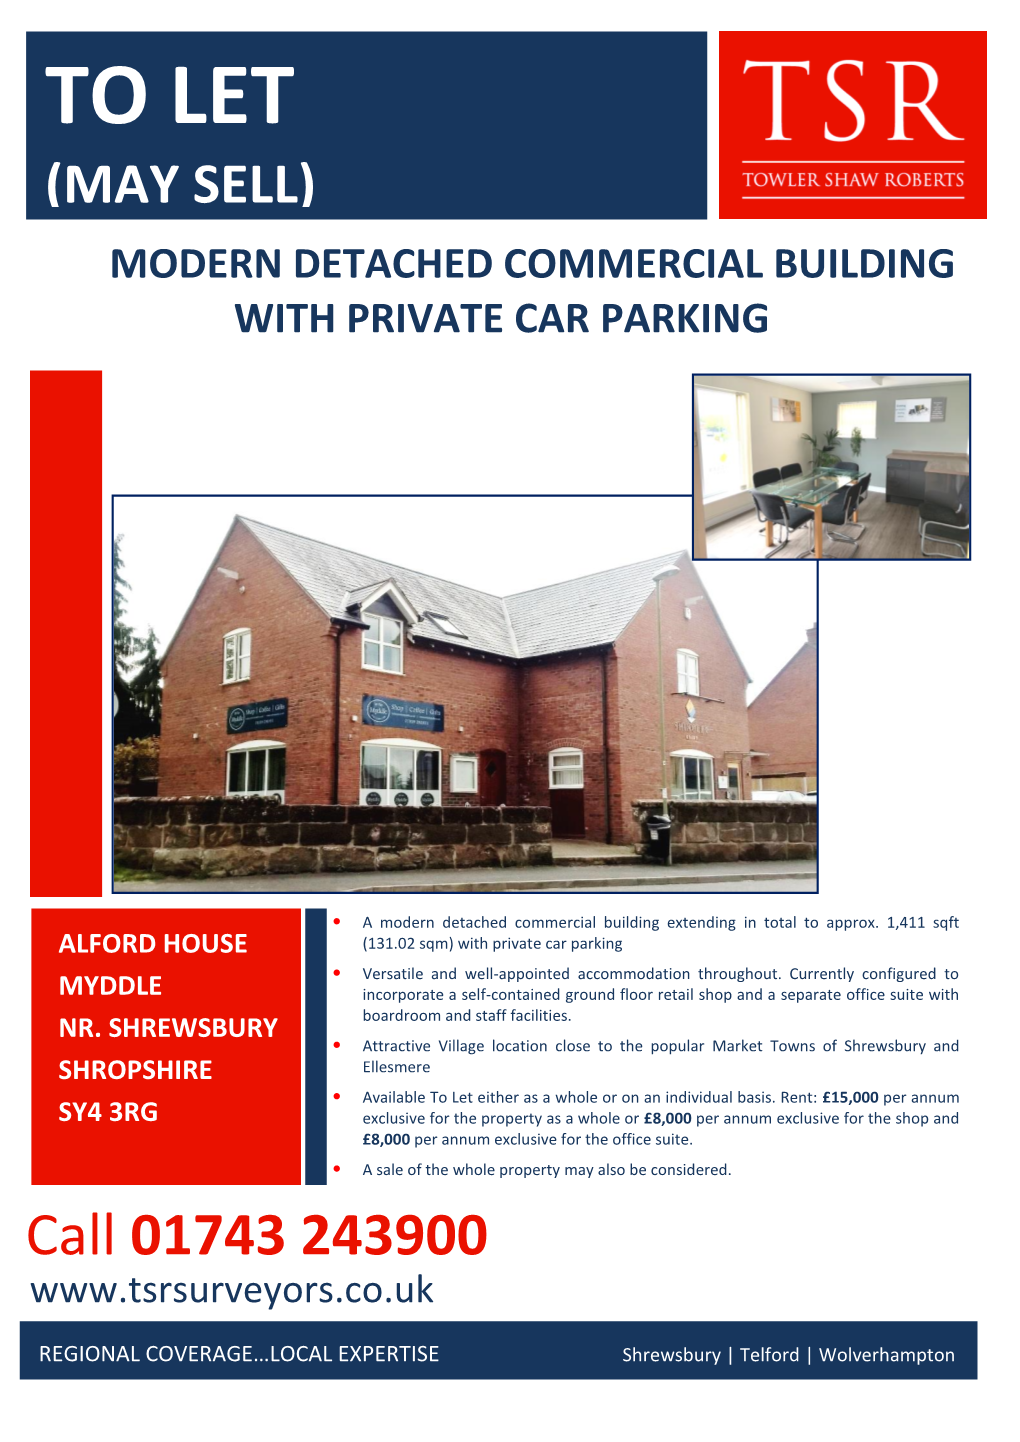 To Let (May Sell) Modern Detached Commercial Building with Private Car Parking